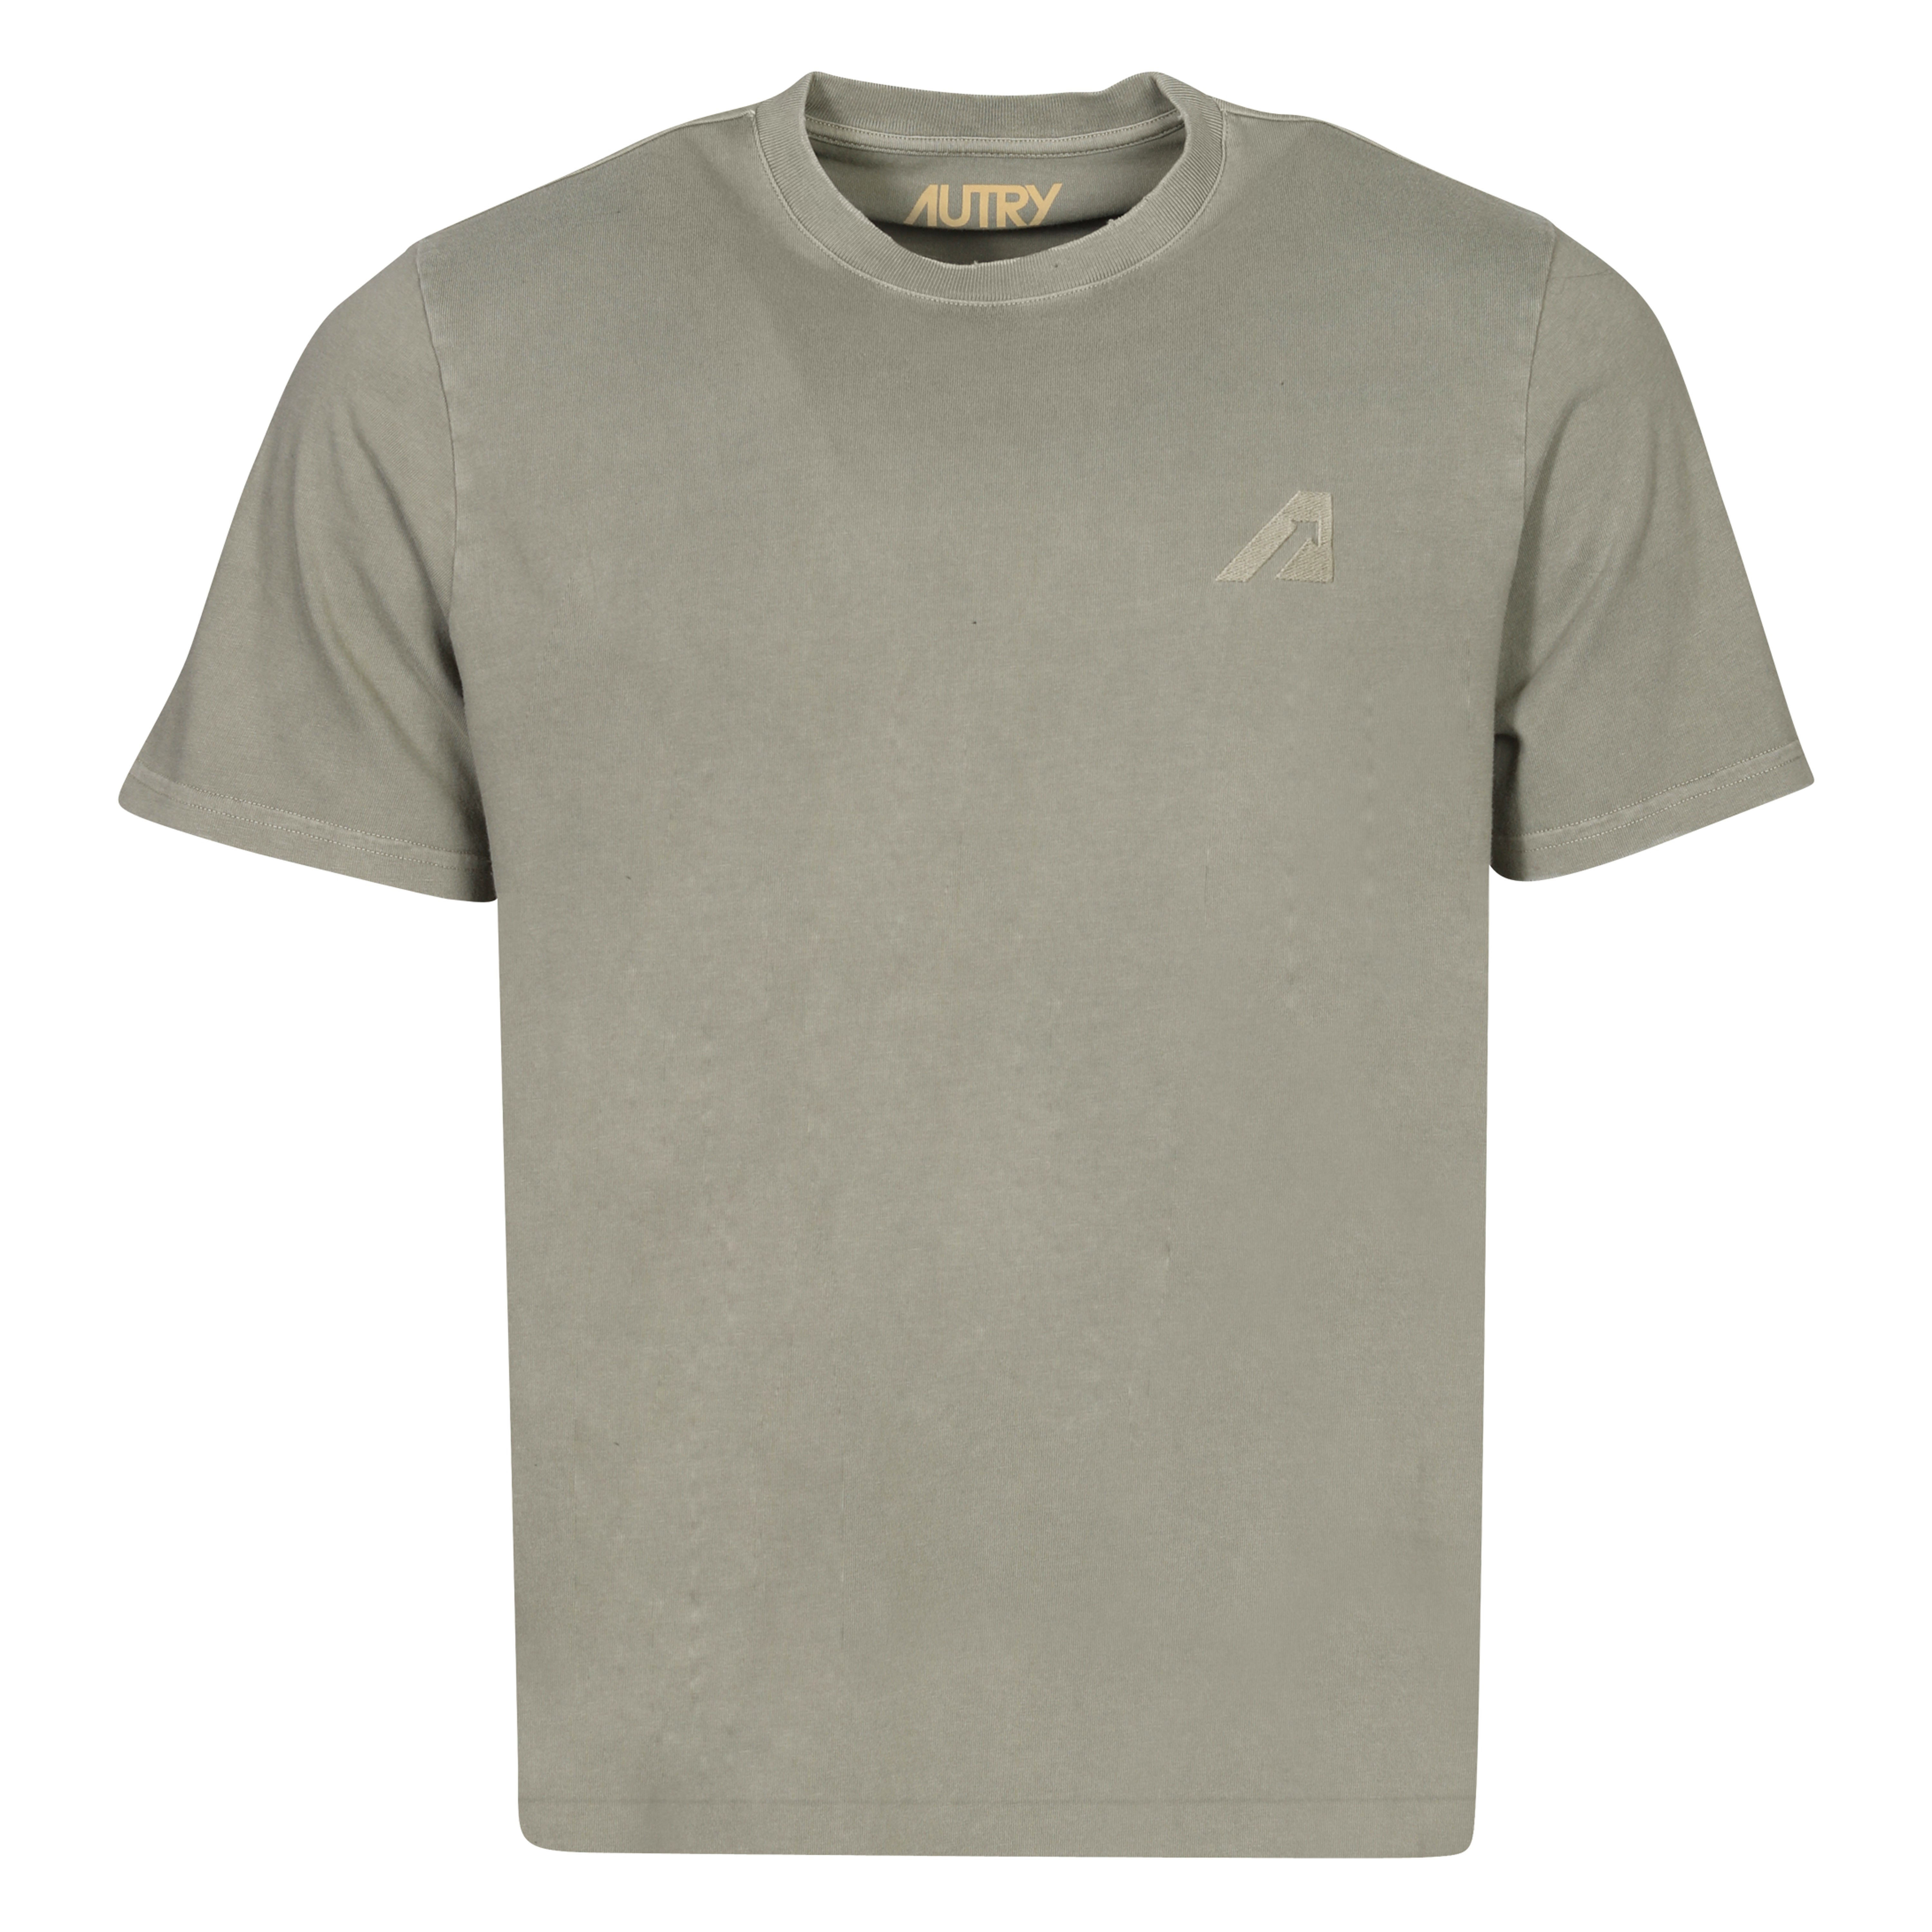 Autry Action Shoes Supervintage T-Shirt in Tinto Light Green S